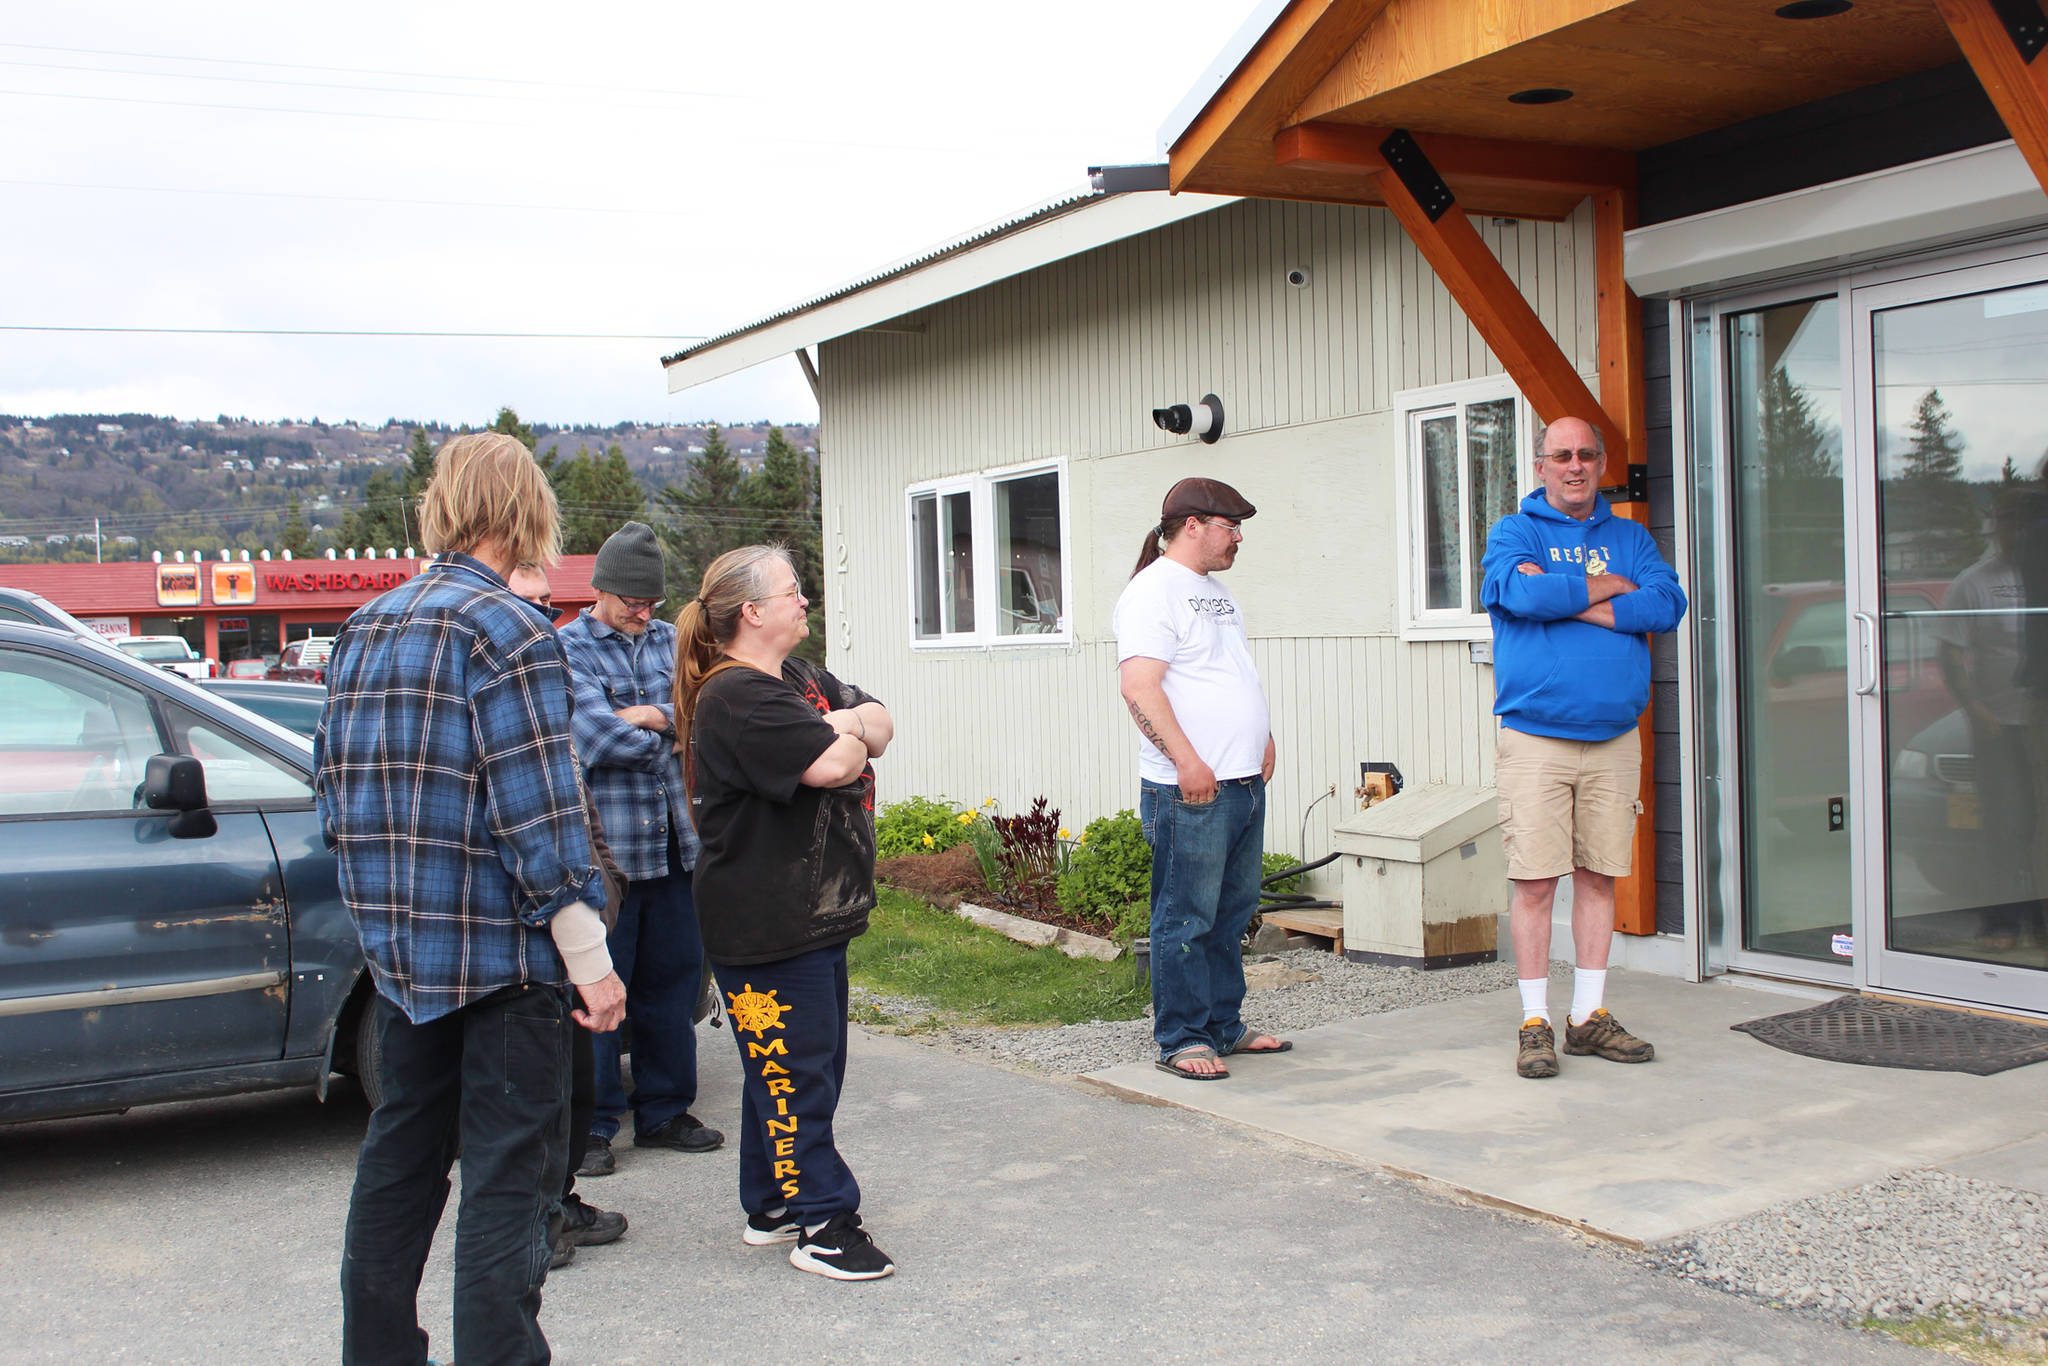 A line forms outside Uncle Herb’s in anticipation of its grand opening Thursday, May 24, 2018 on Ocean Drive in Homer, Alaska. (Photo by Megan Pacer/Homer News)